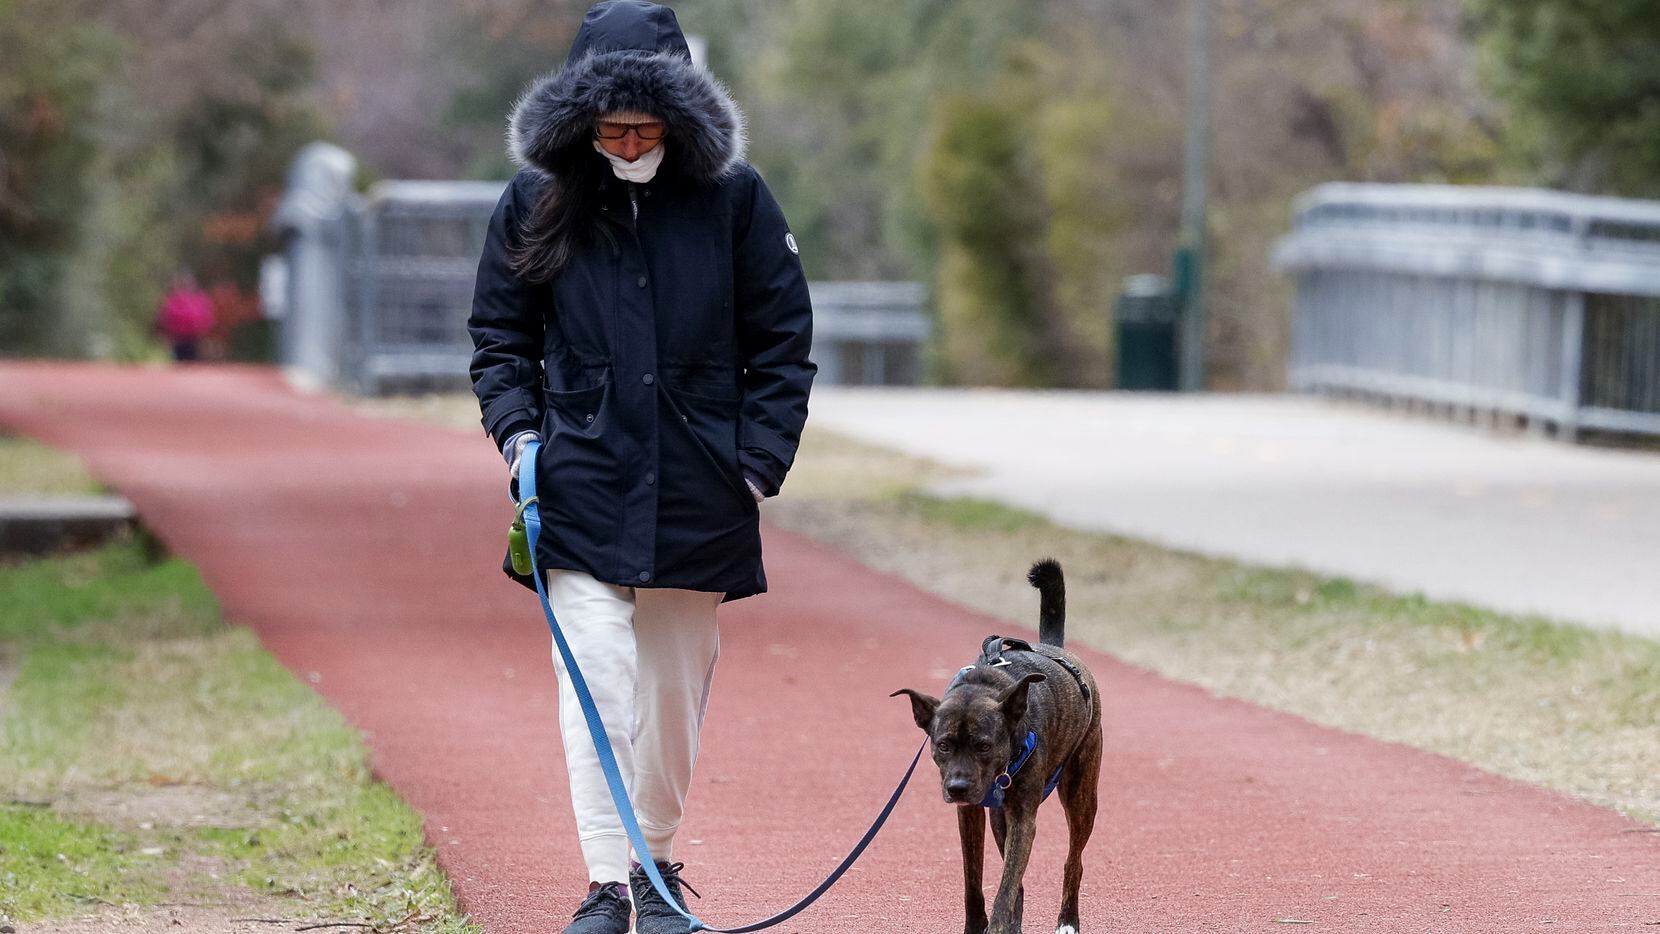 Sarah Capeloutl, 29, walks with her dog Addie along the Katy Trail in Dallas.